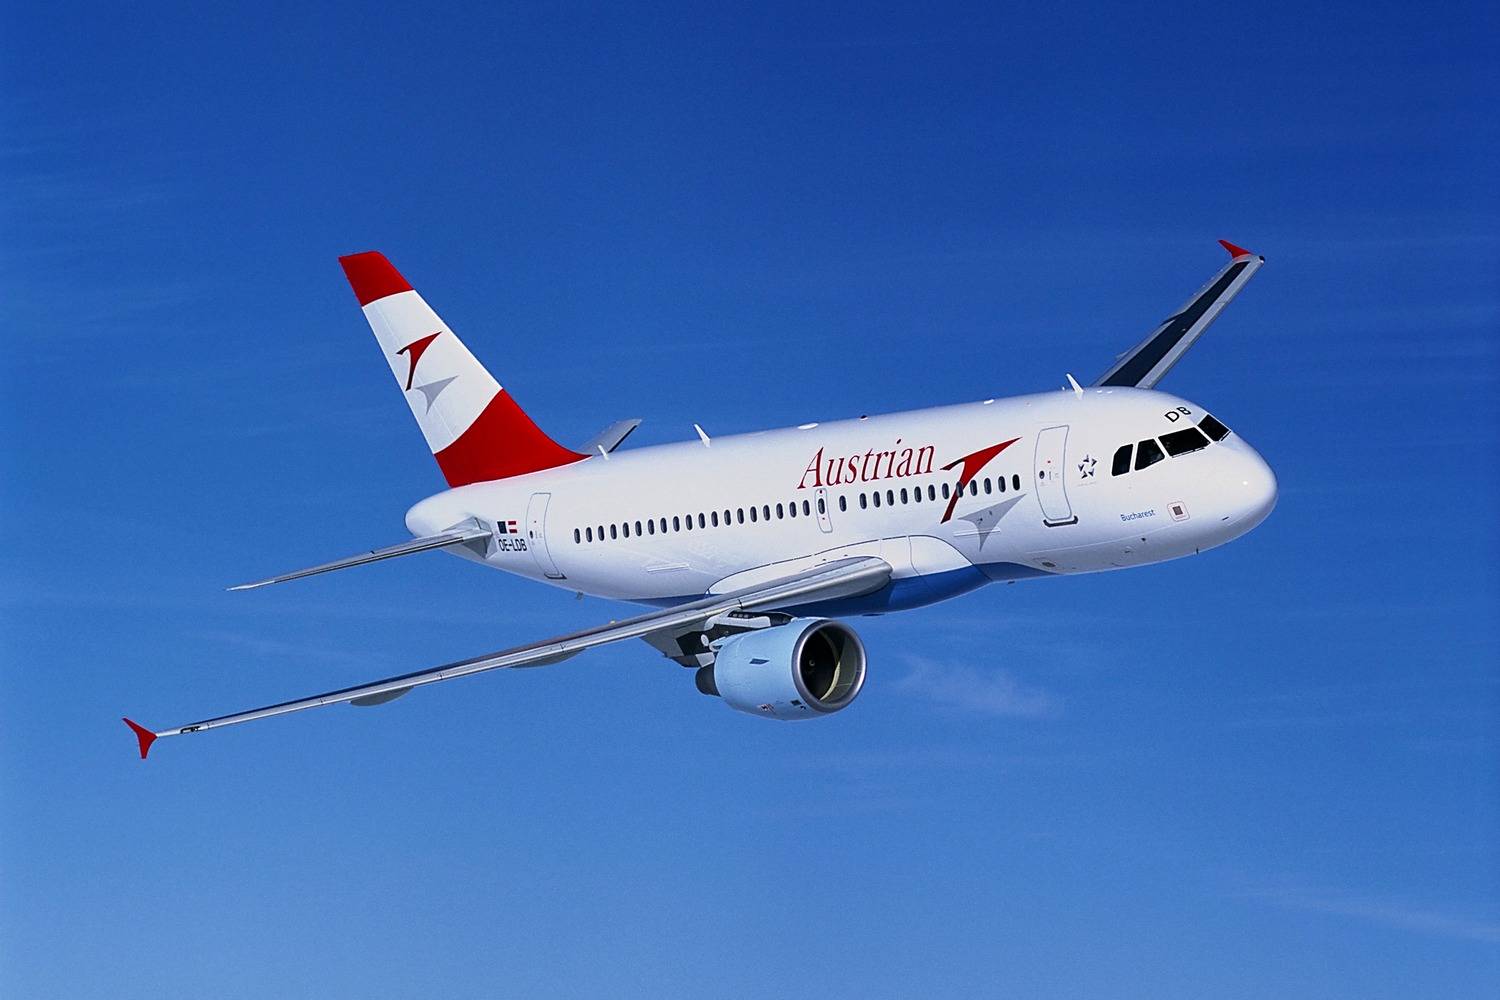 Book more flexibly now and fly worry-free | austrian airlines